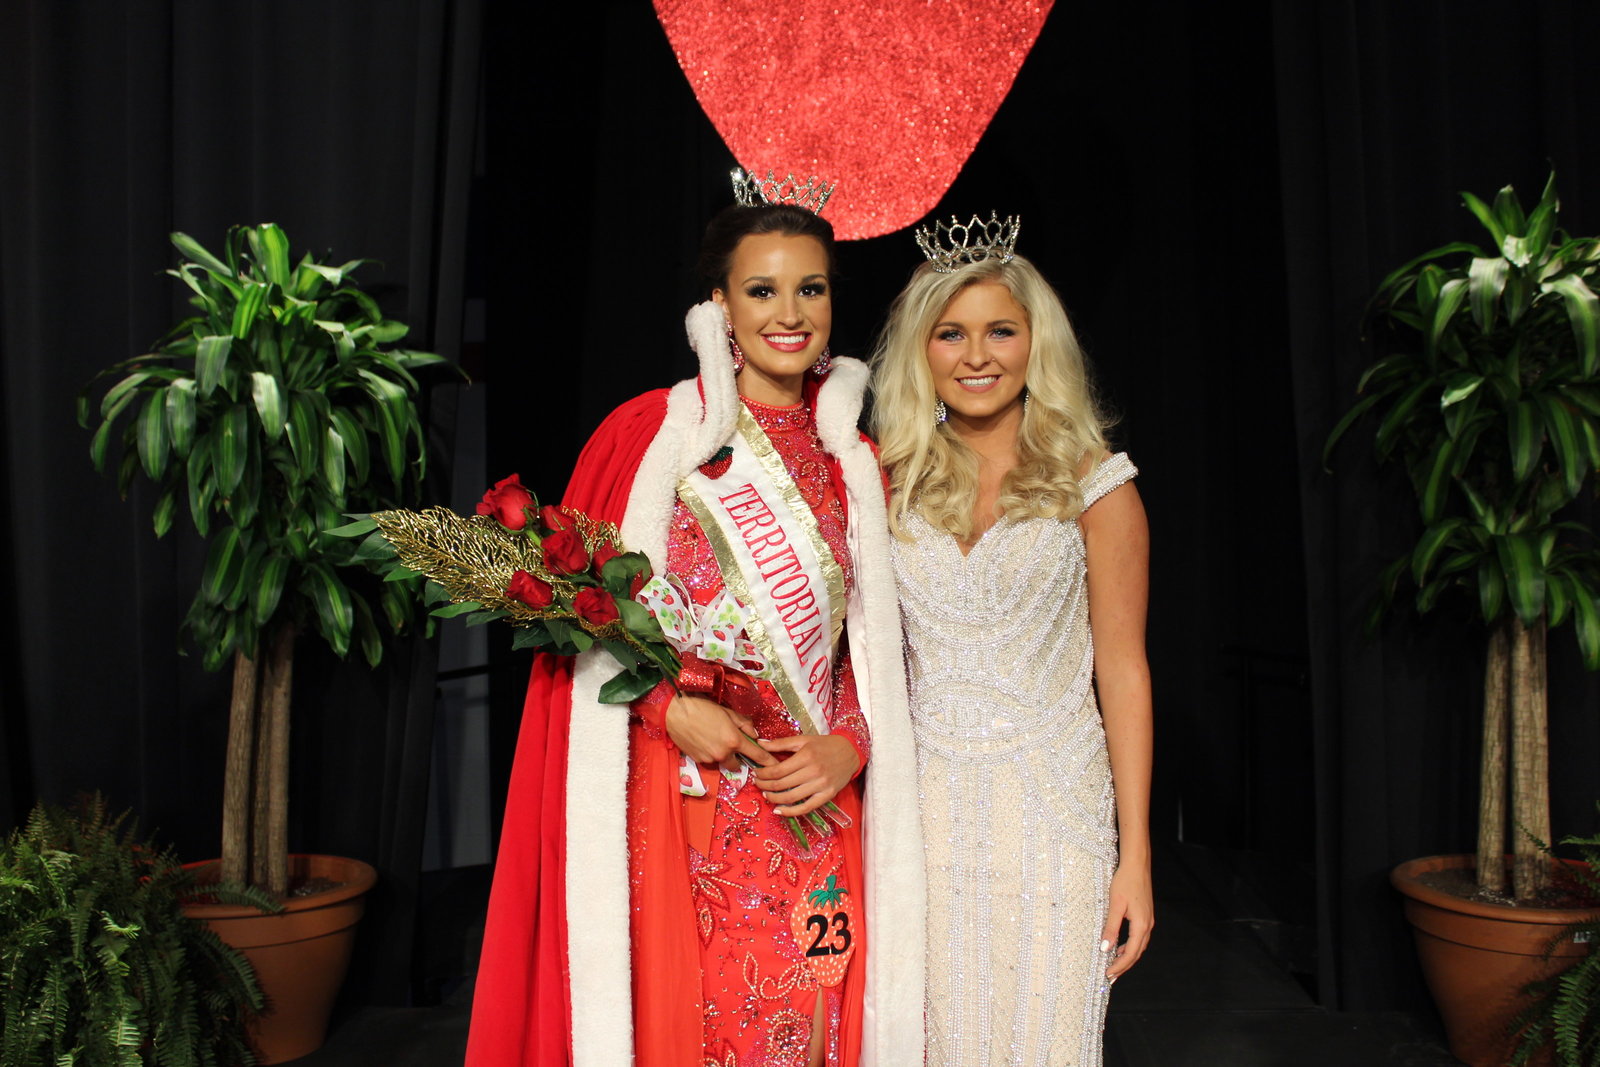 West Tennessee Strawberry Festival - Humboldt TN - Pageant - Main Terr23